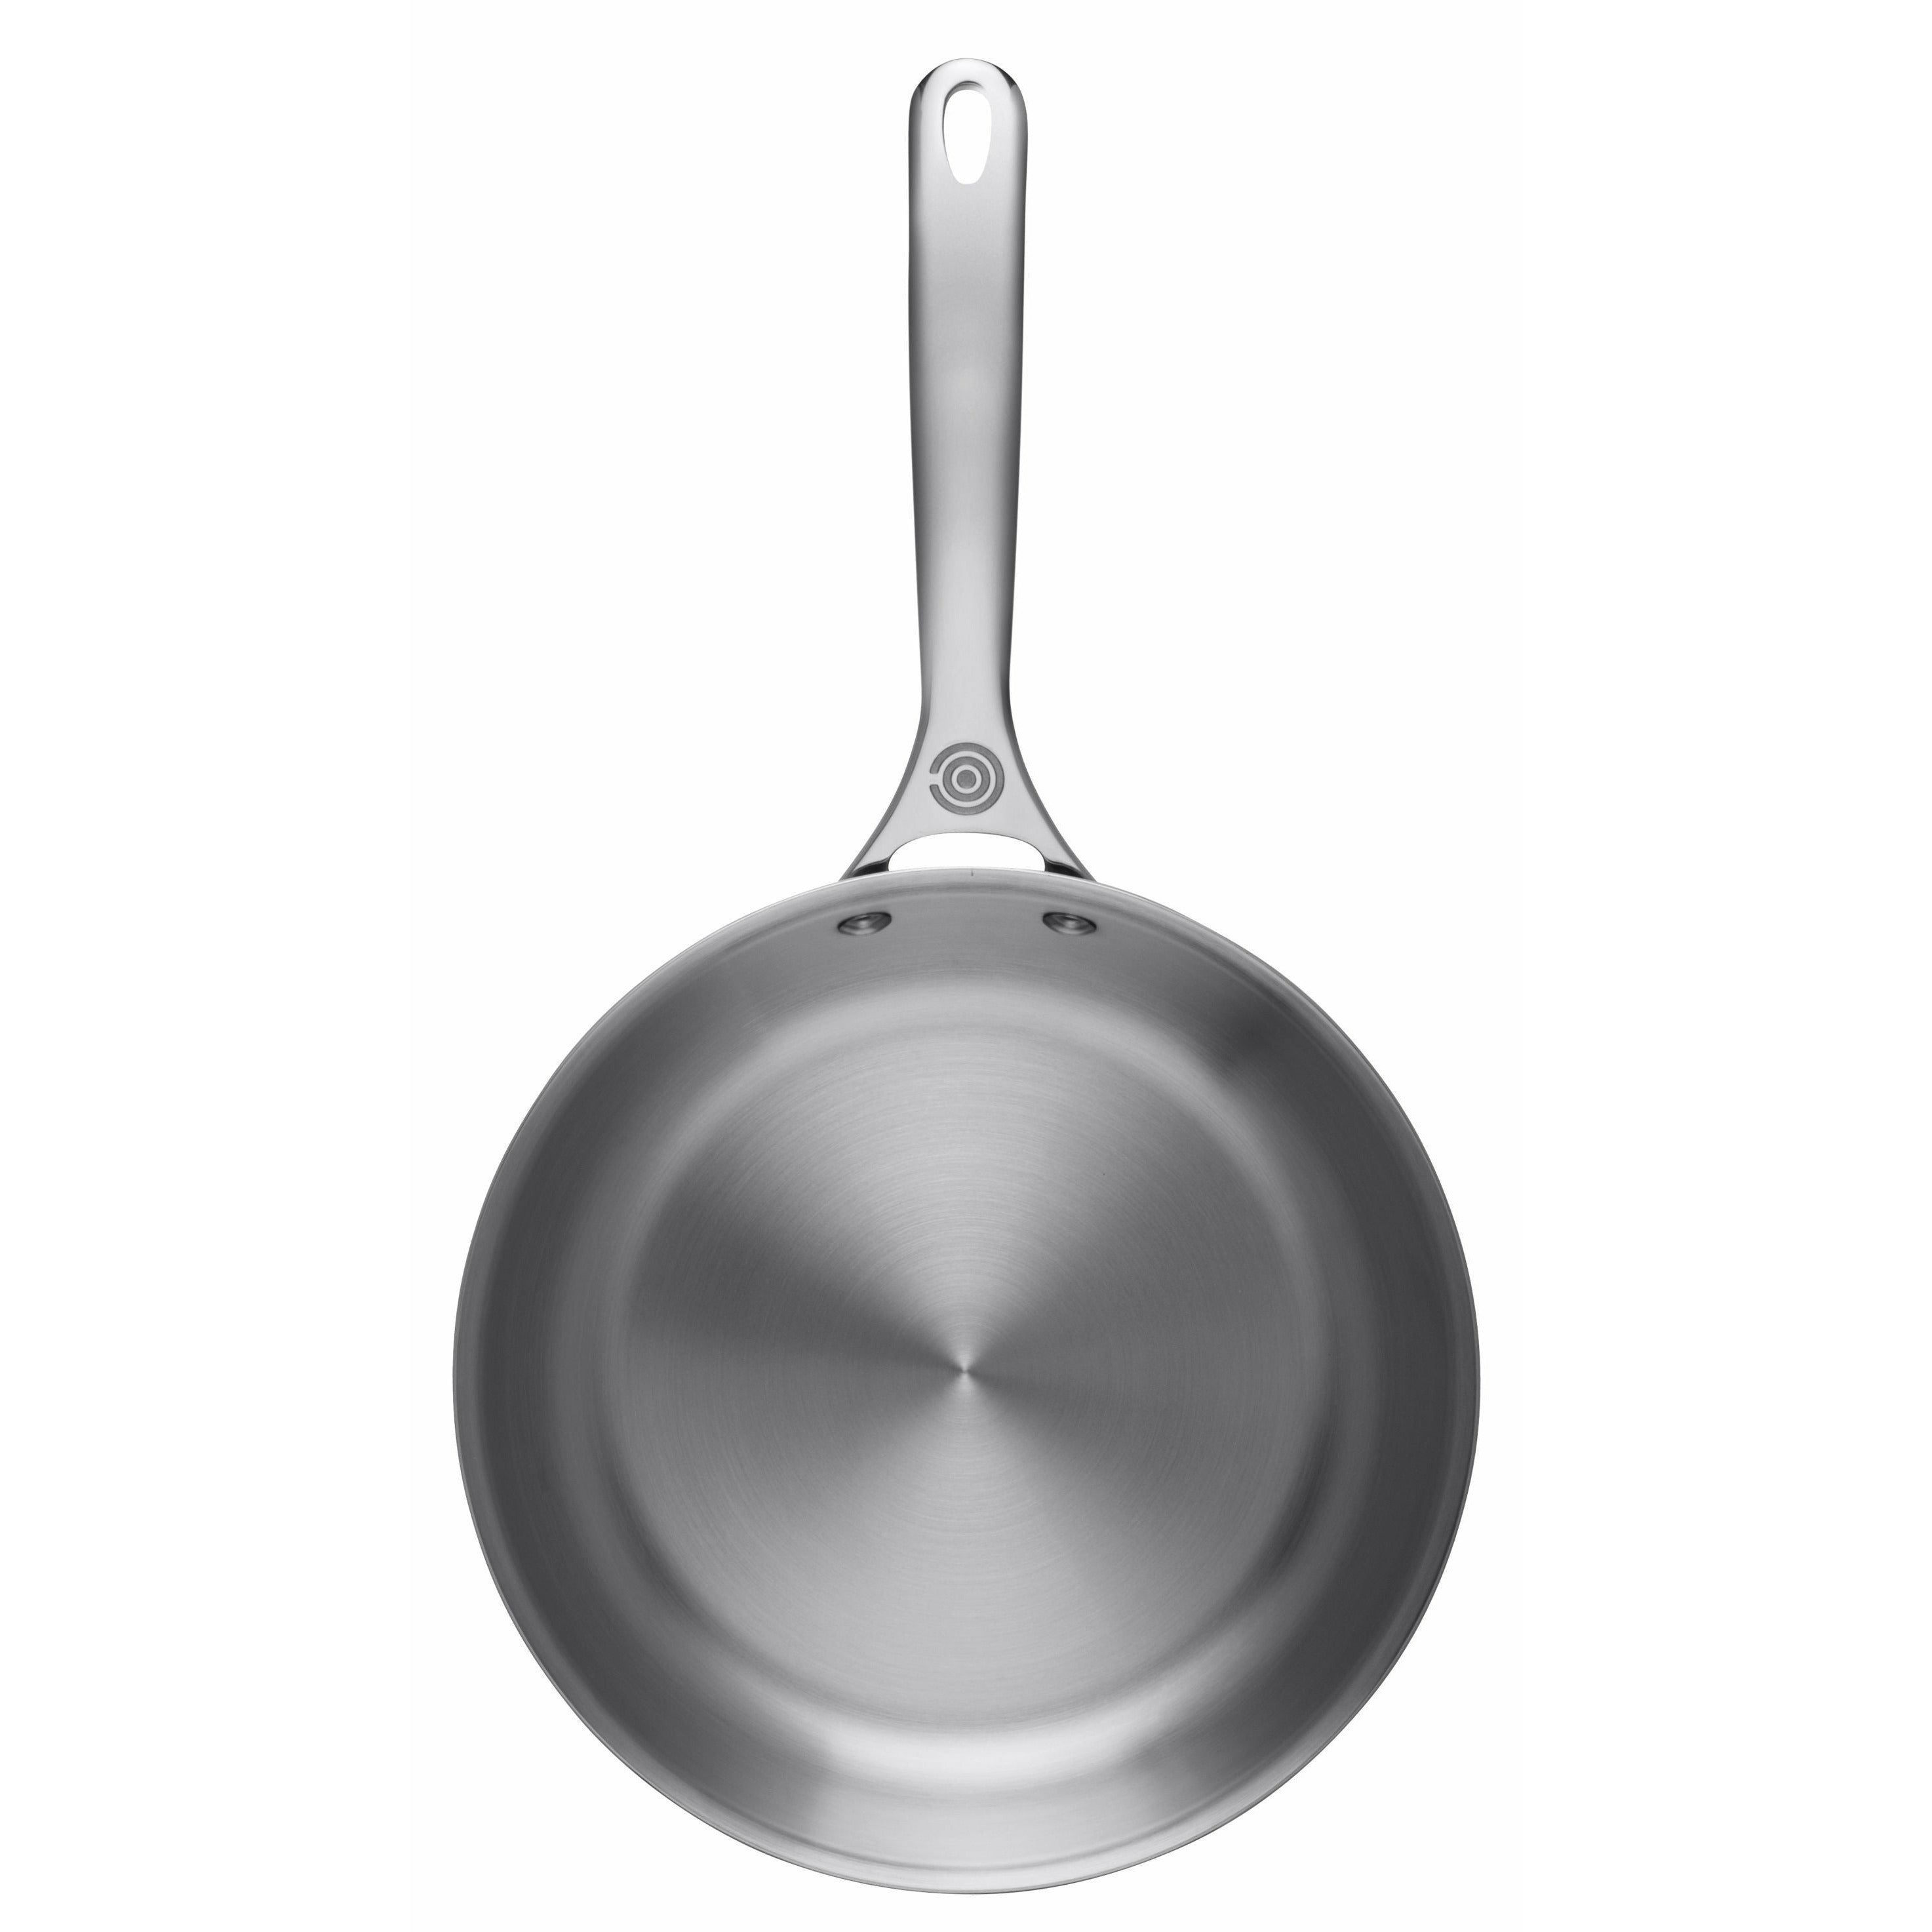 Le Creuset Signature Stainless Steel Uncoated Frying Pan, 24 Cm